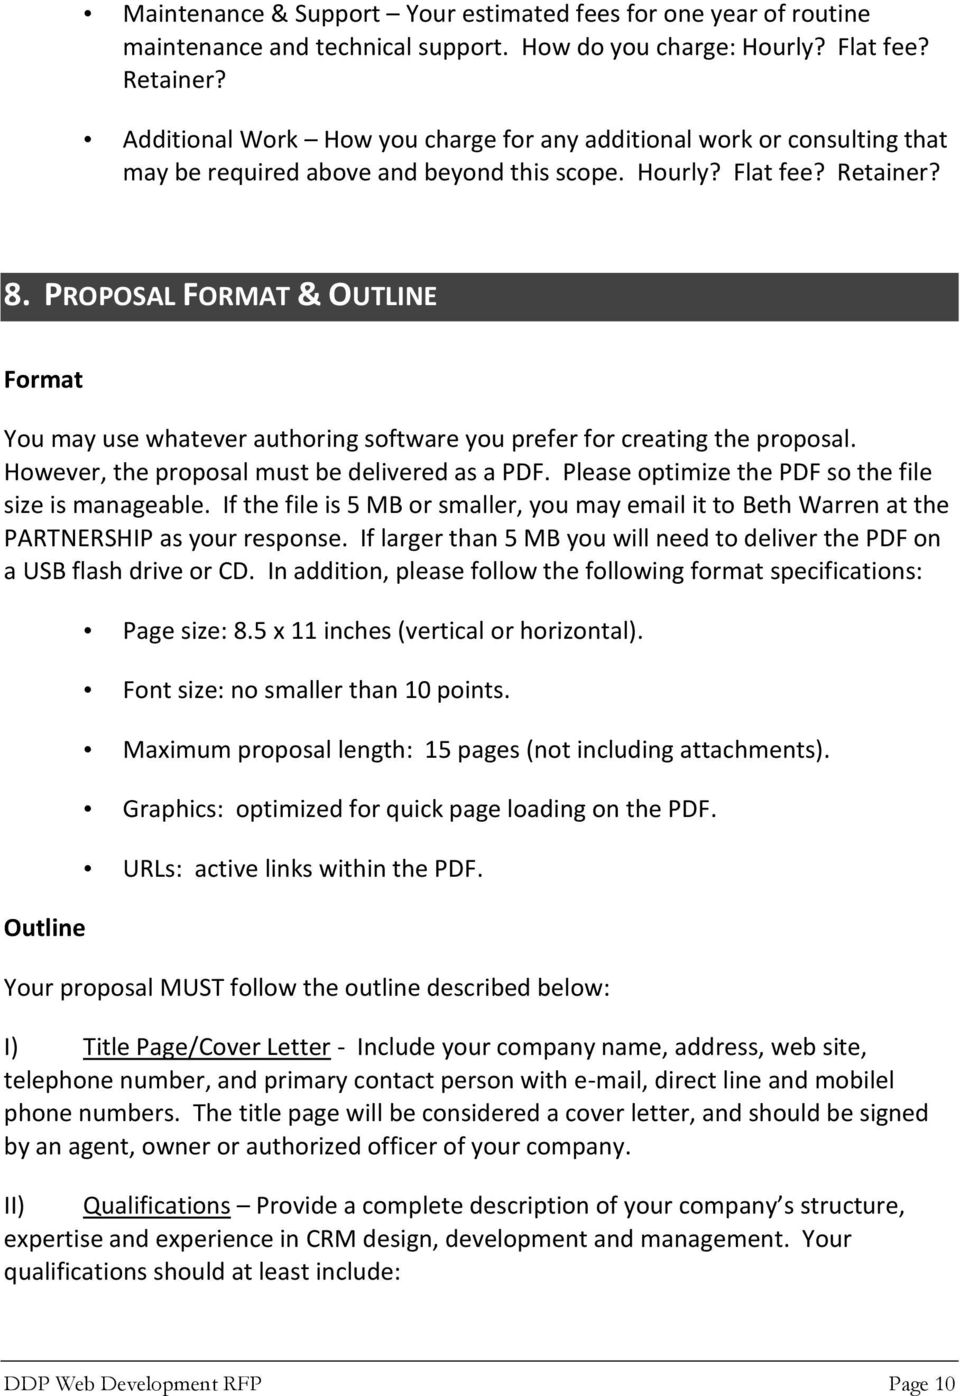 PROPOSAL FORMAT & OUTLINE Format You may use whatever authoring software you prefer for creating the proposal. However, the proposal must be delivered as a PDF.